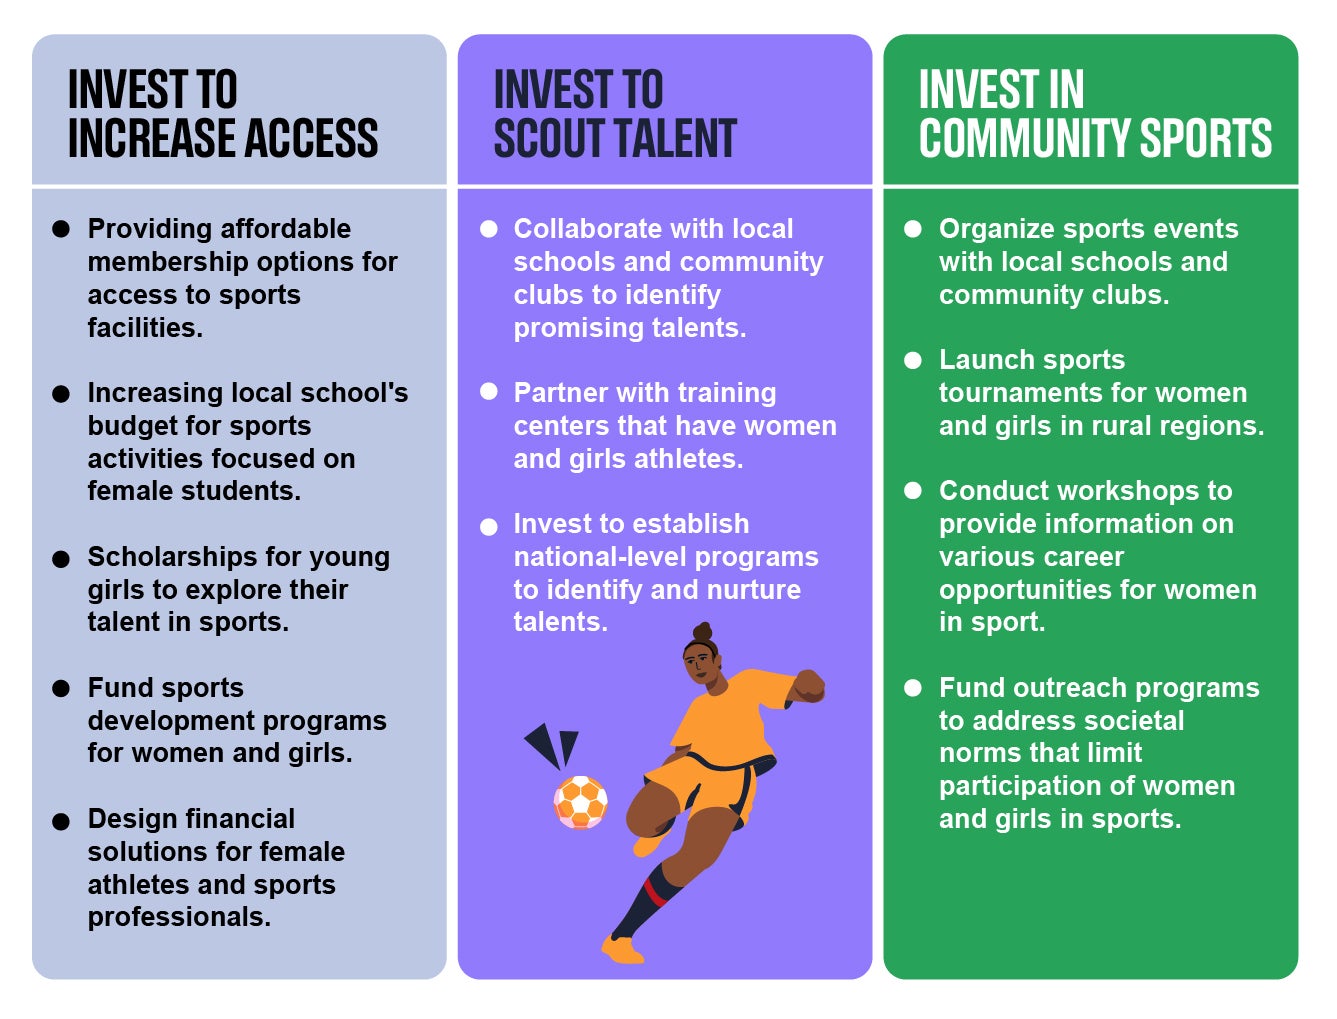 Creating holistic change in women’s sports through investment